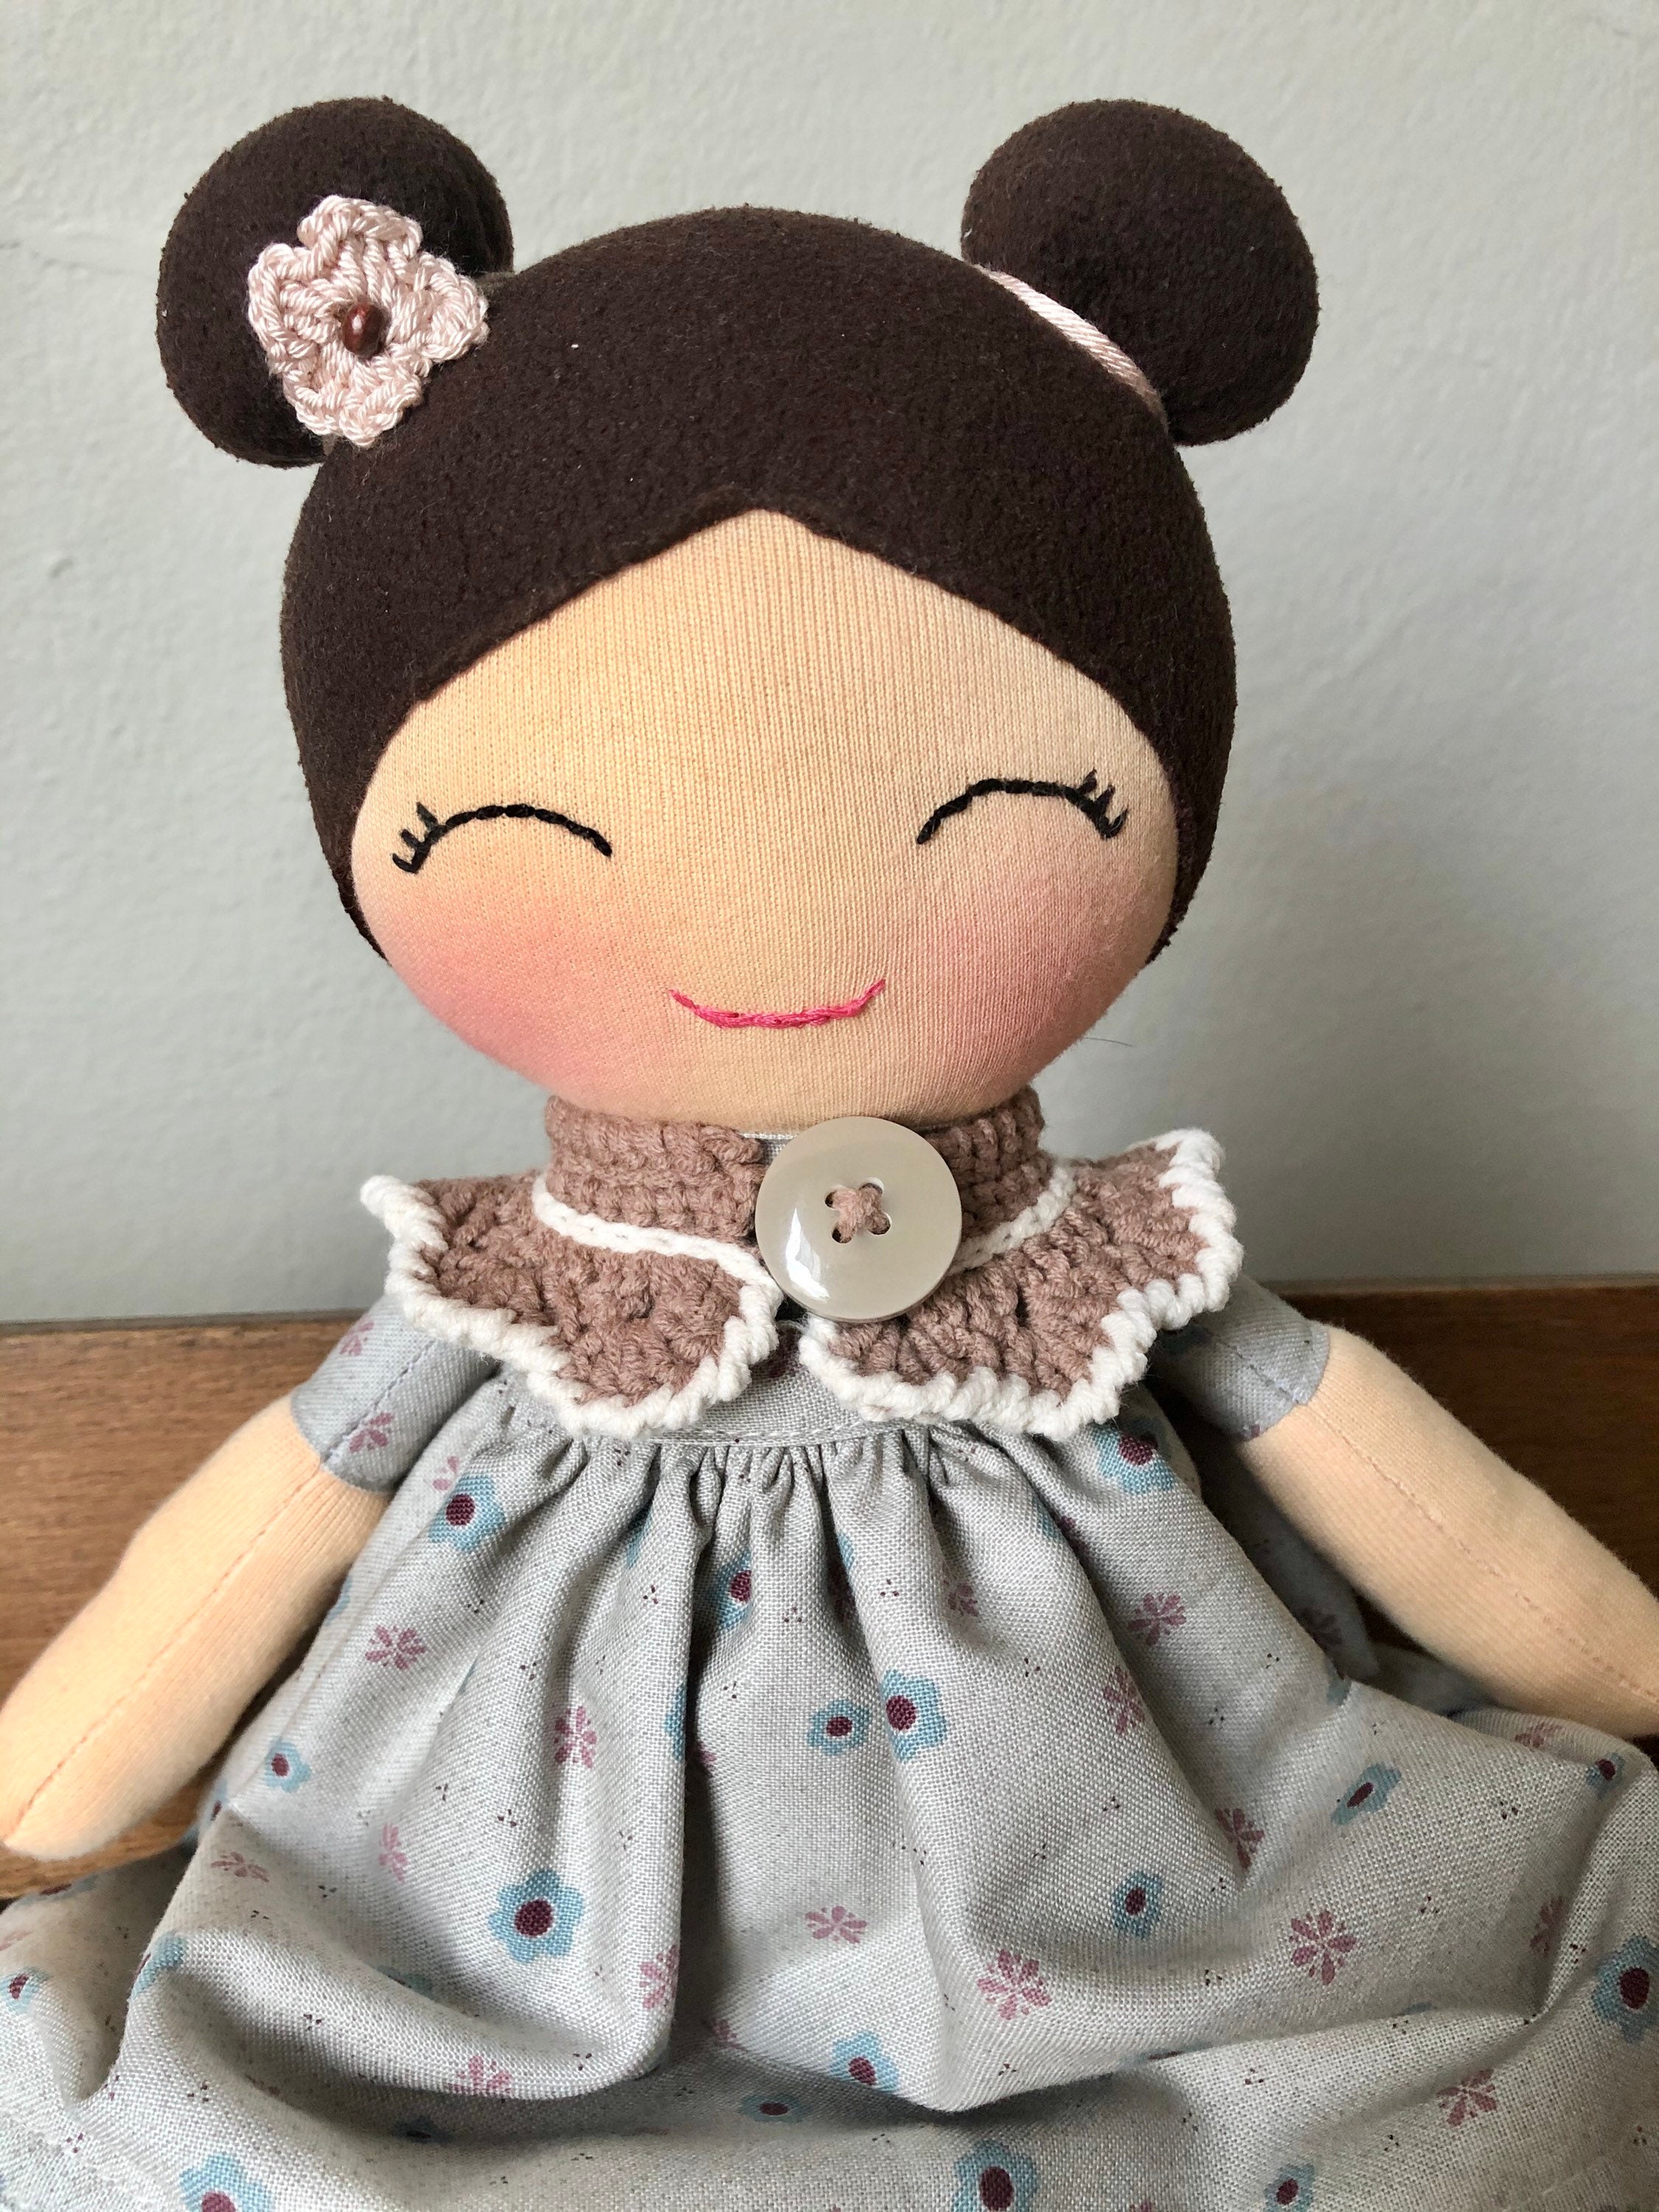 Baby first rag doll girl soft doll gift for baby toddlers | Etsy